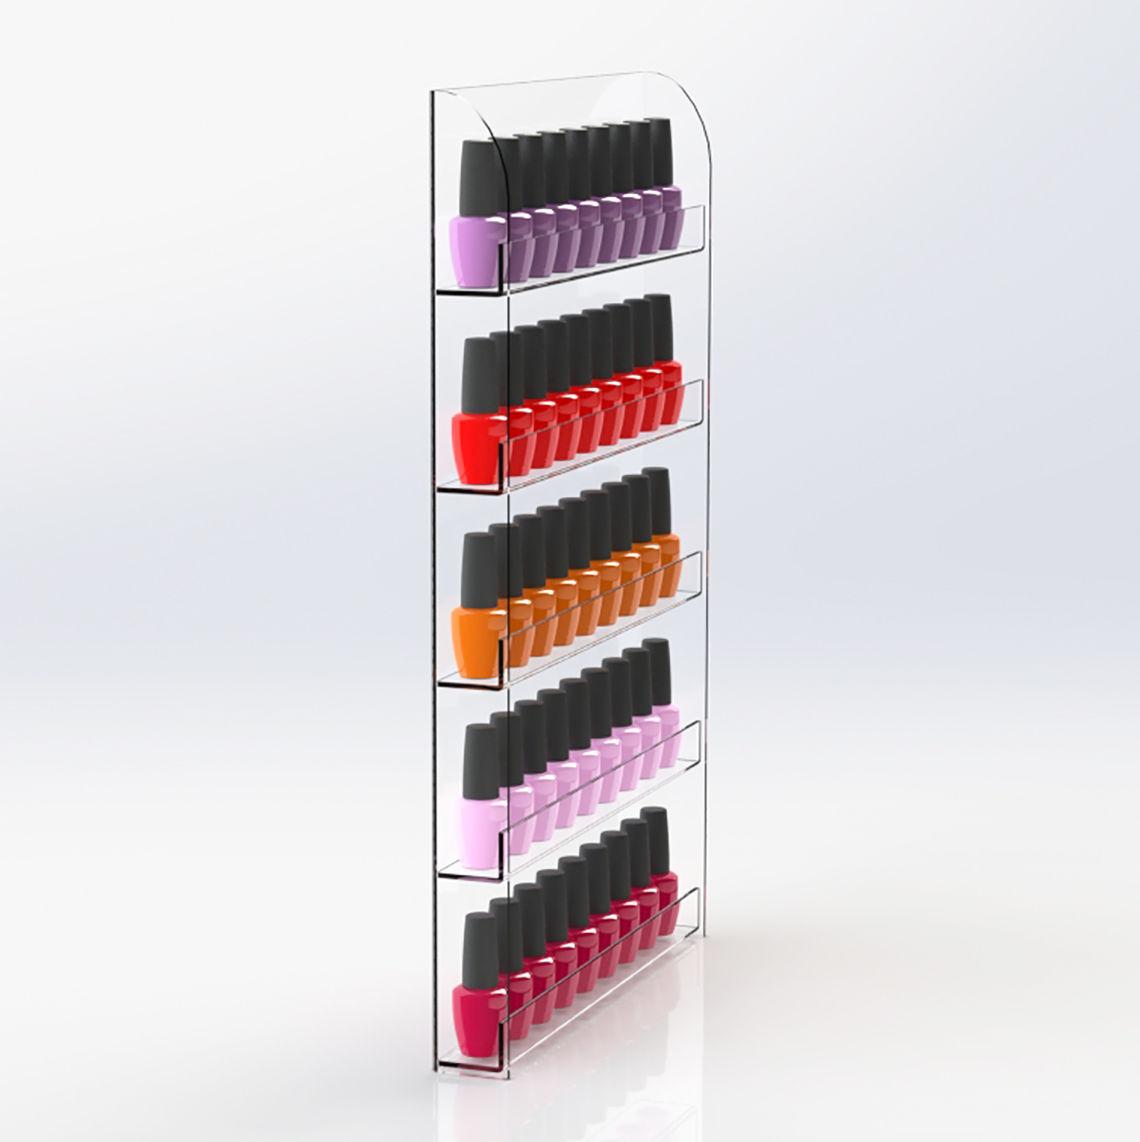 Nail Polish Display Stands available in may sizes - Displaypro